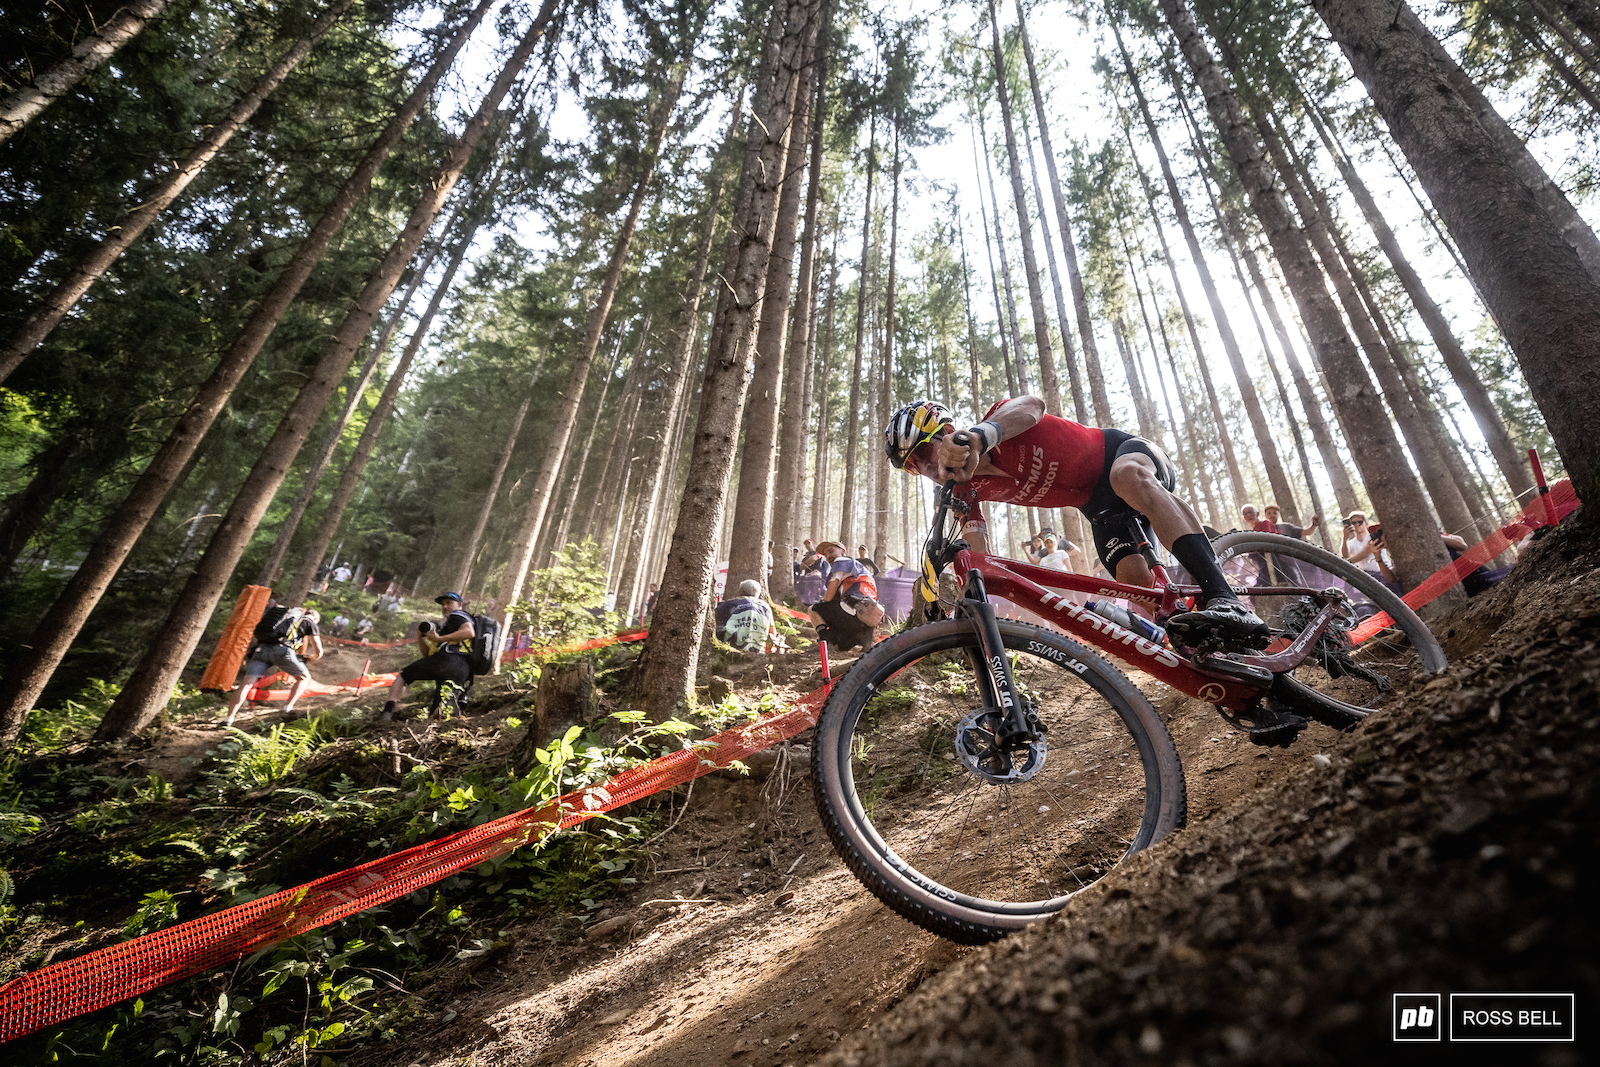 What a day for Lars Forster taking his second World Cup victory.